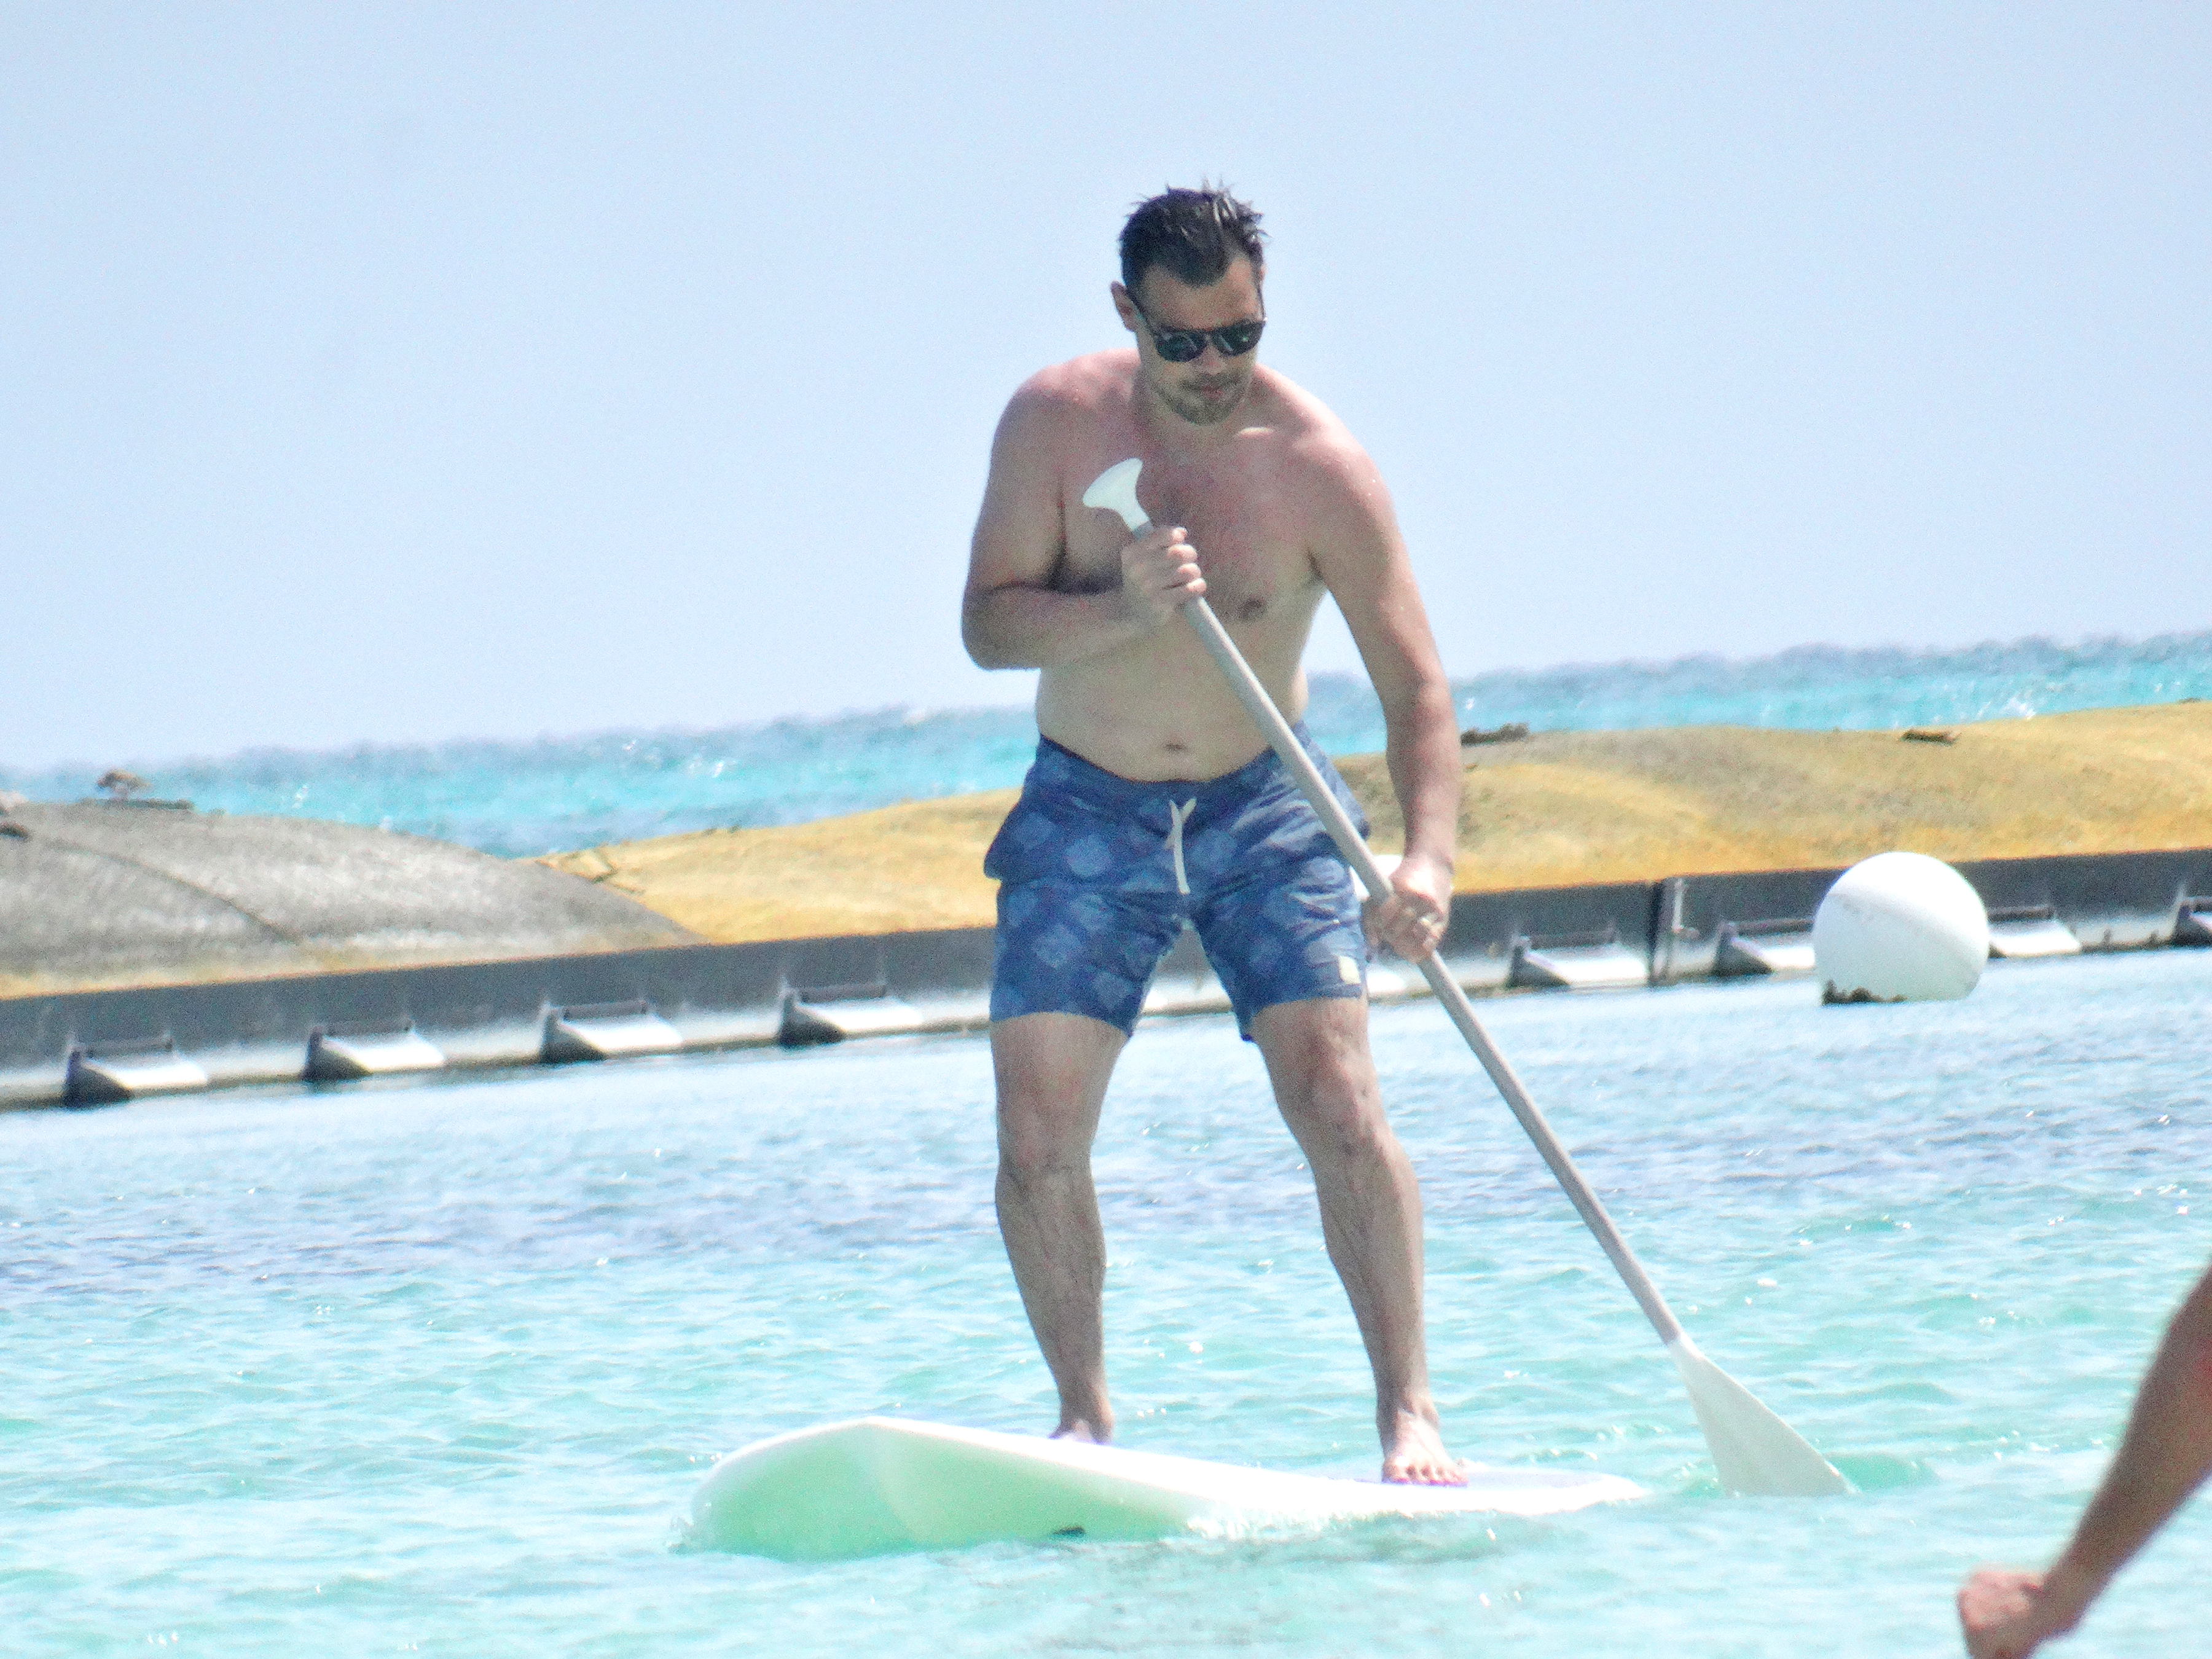 The couple went paddle boarding in Tulum, Mexico, this week